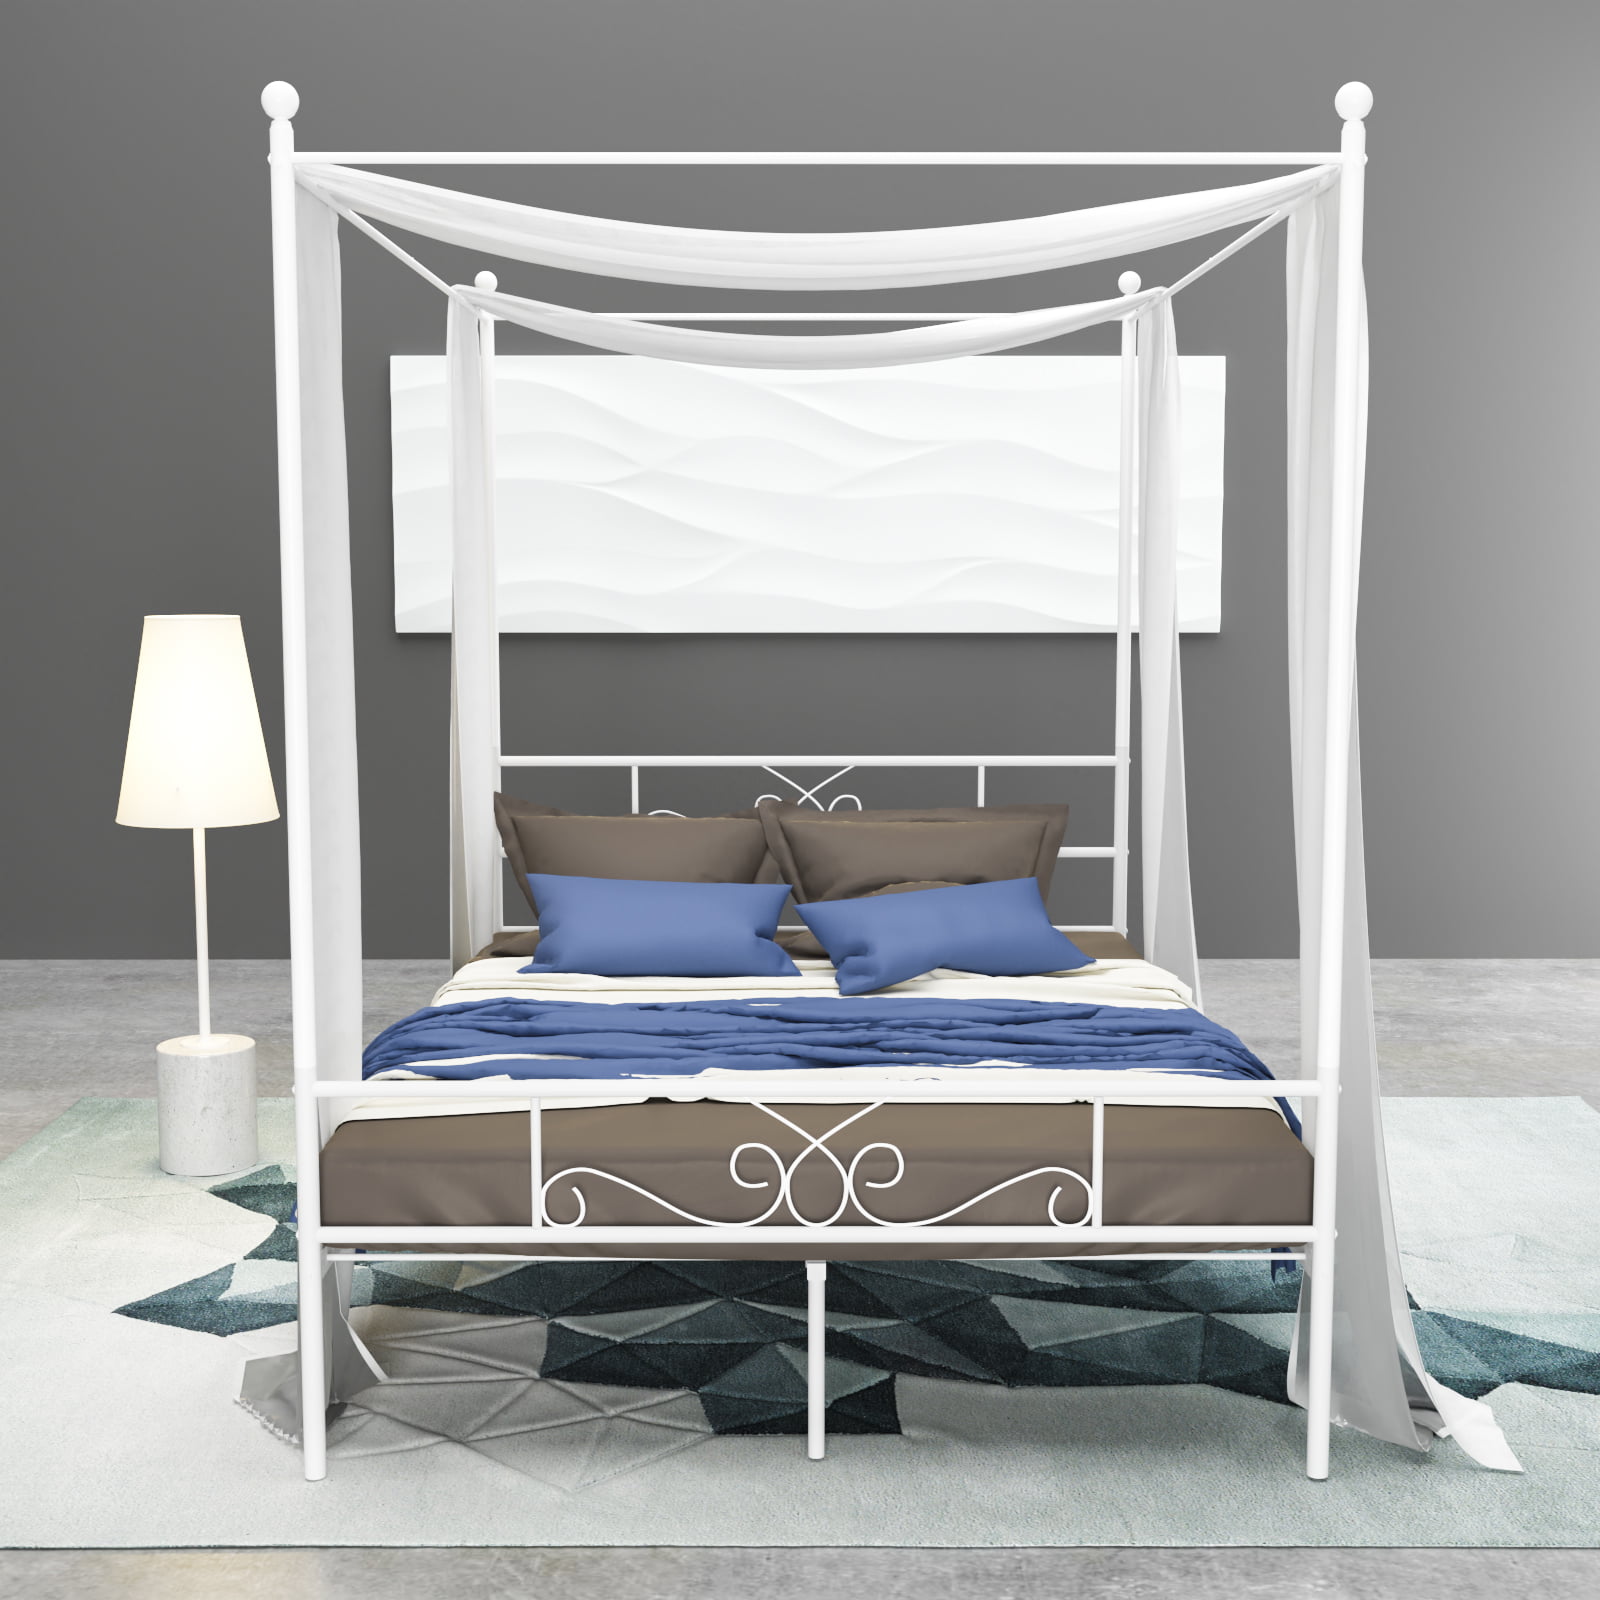 Shunda K Canopy Bed Frame Queen Size, Stanley Canopy Bed King